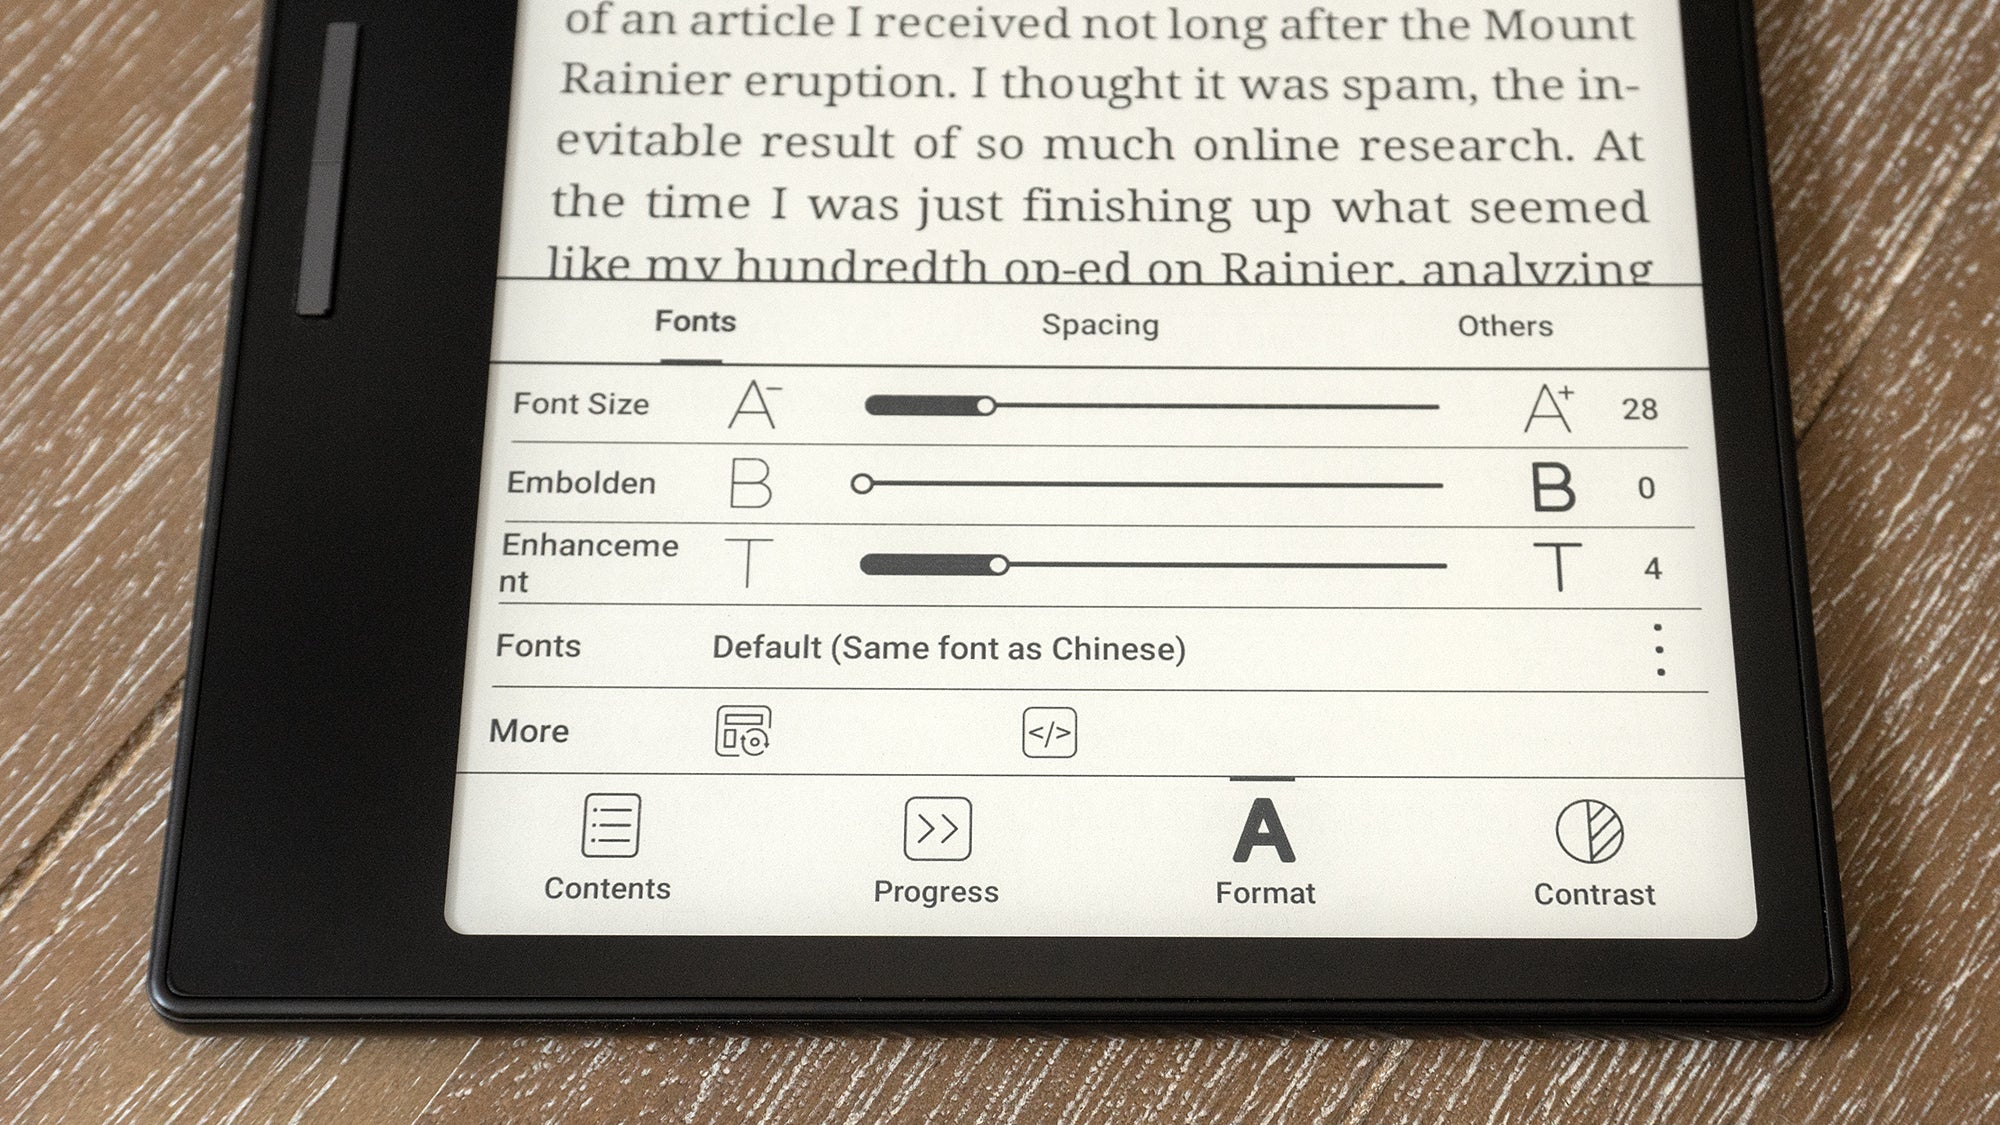 The extensive customizability of the Onyx Boox Leaf 2 can sometimes be overwhelming, including how the text in ebooks and documents is displayed. (Photo: Andrew Liszewski | Gizmodo)